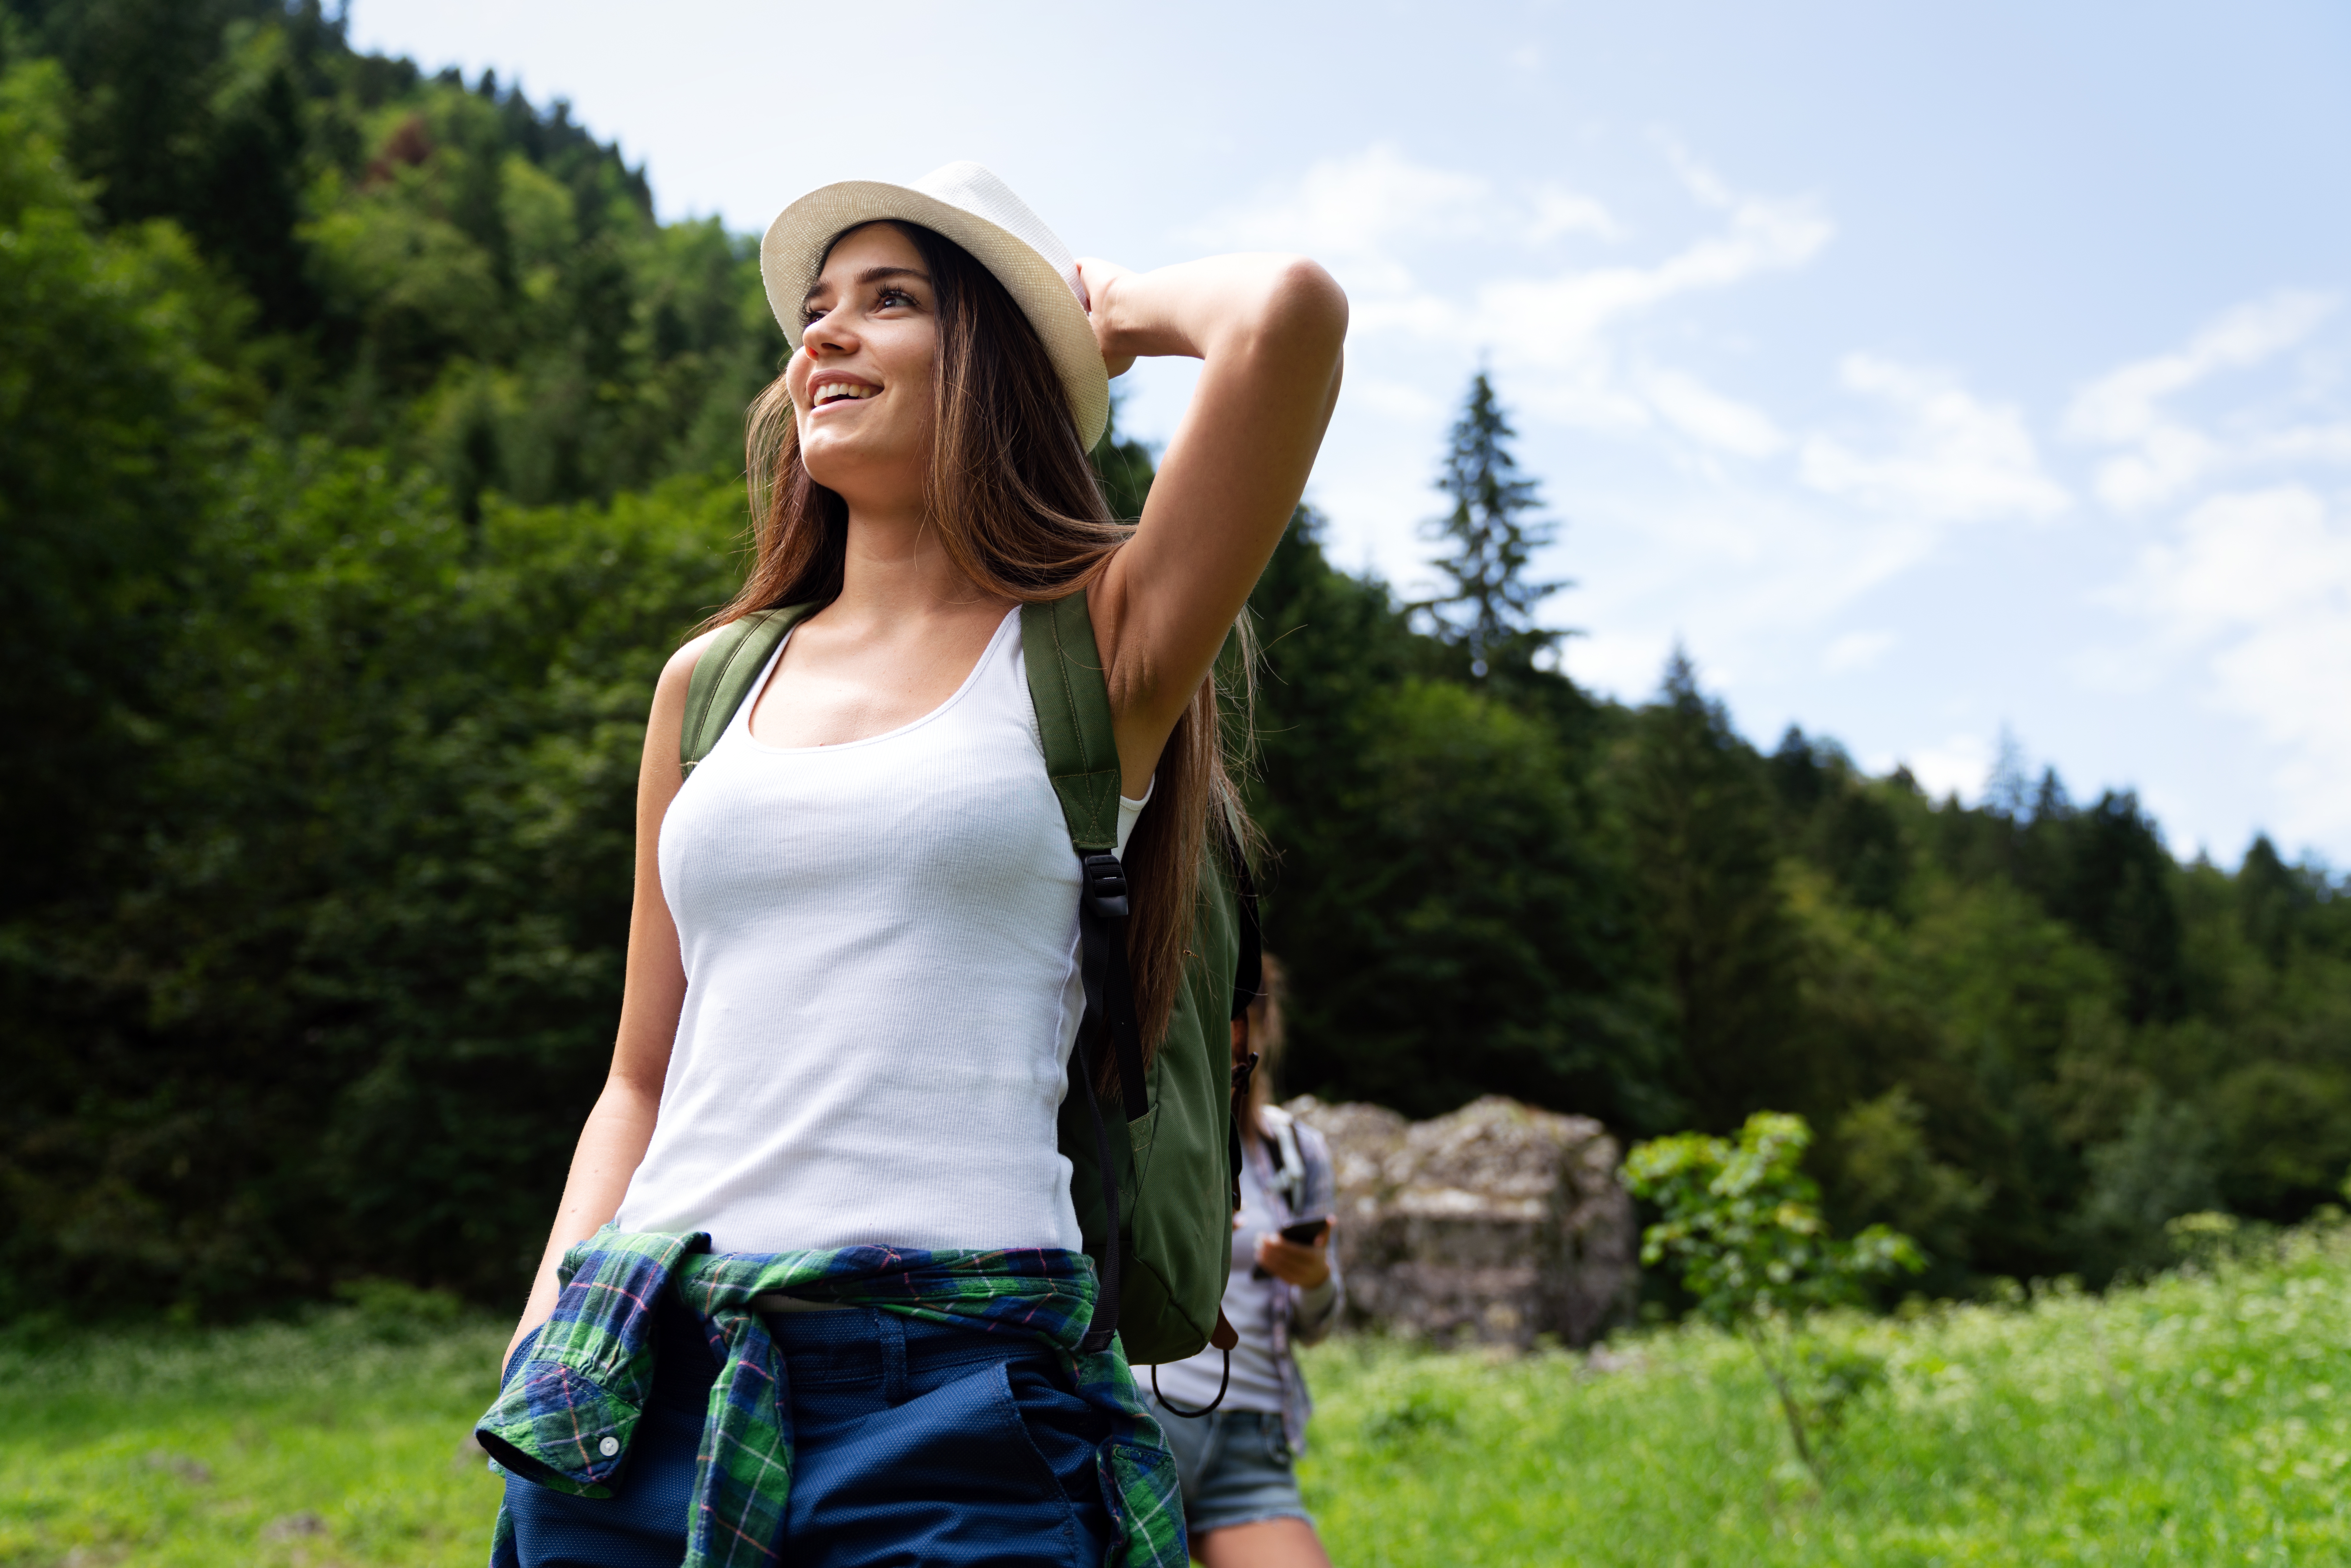 Happy young woman wearing a white tank top, hat, and green backpack standing in a forest while on a hike